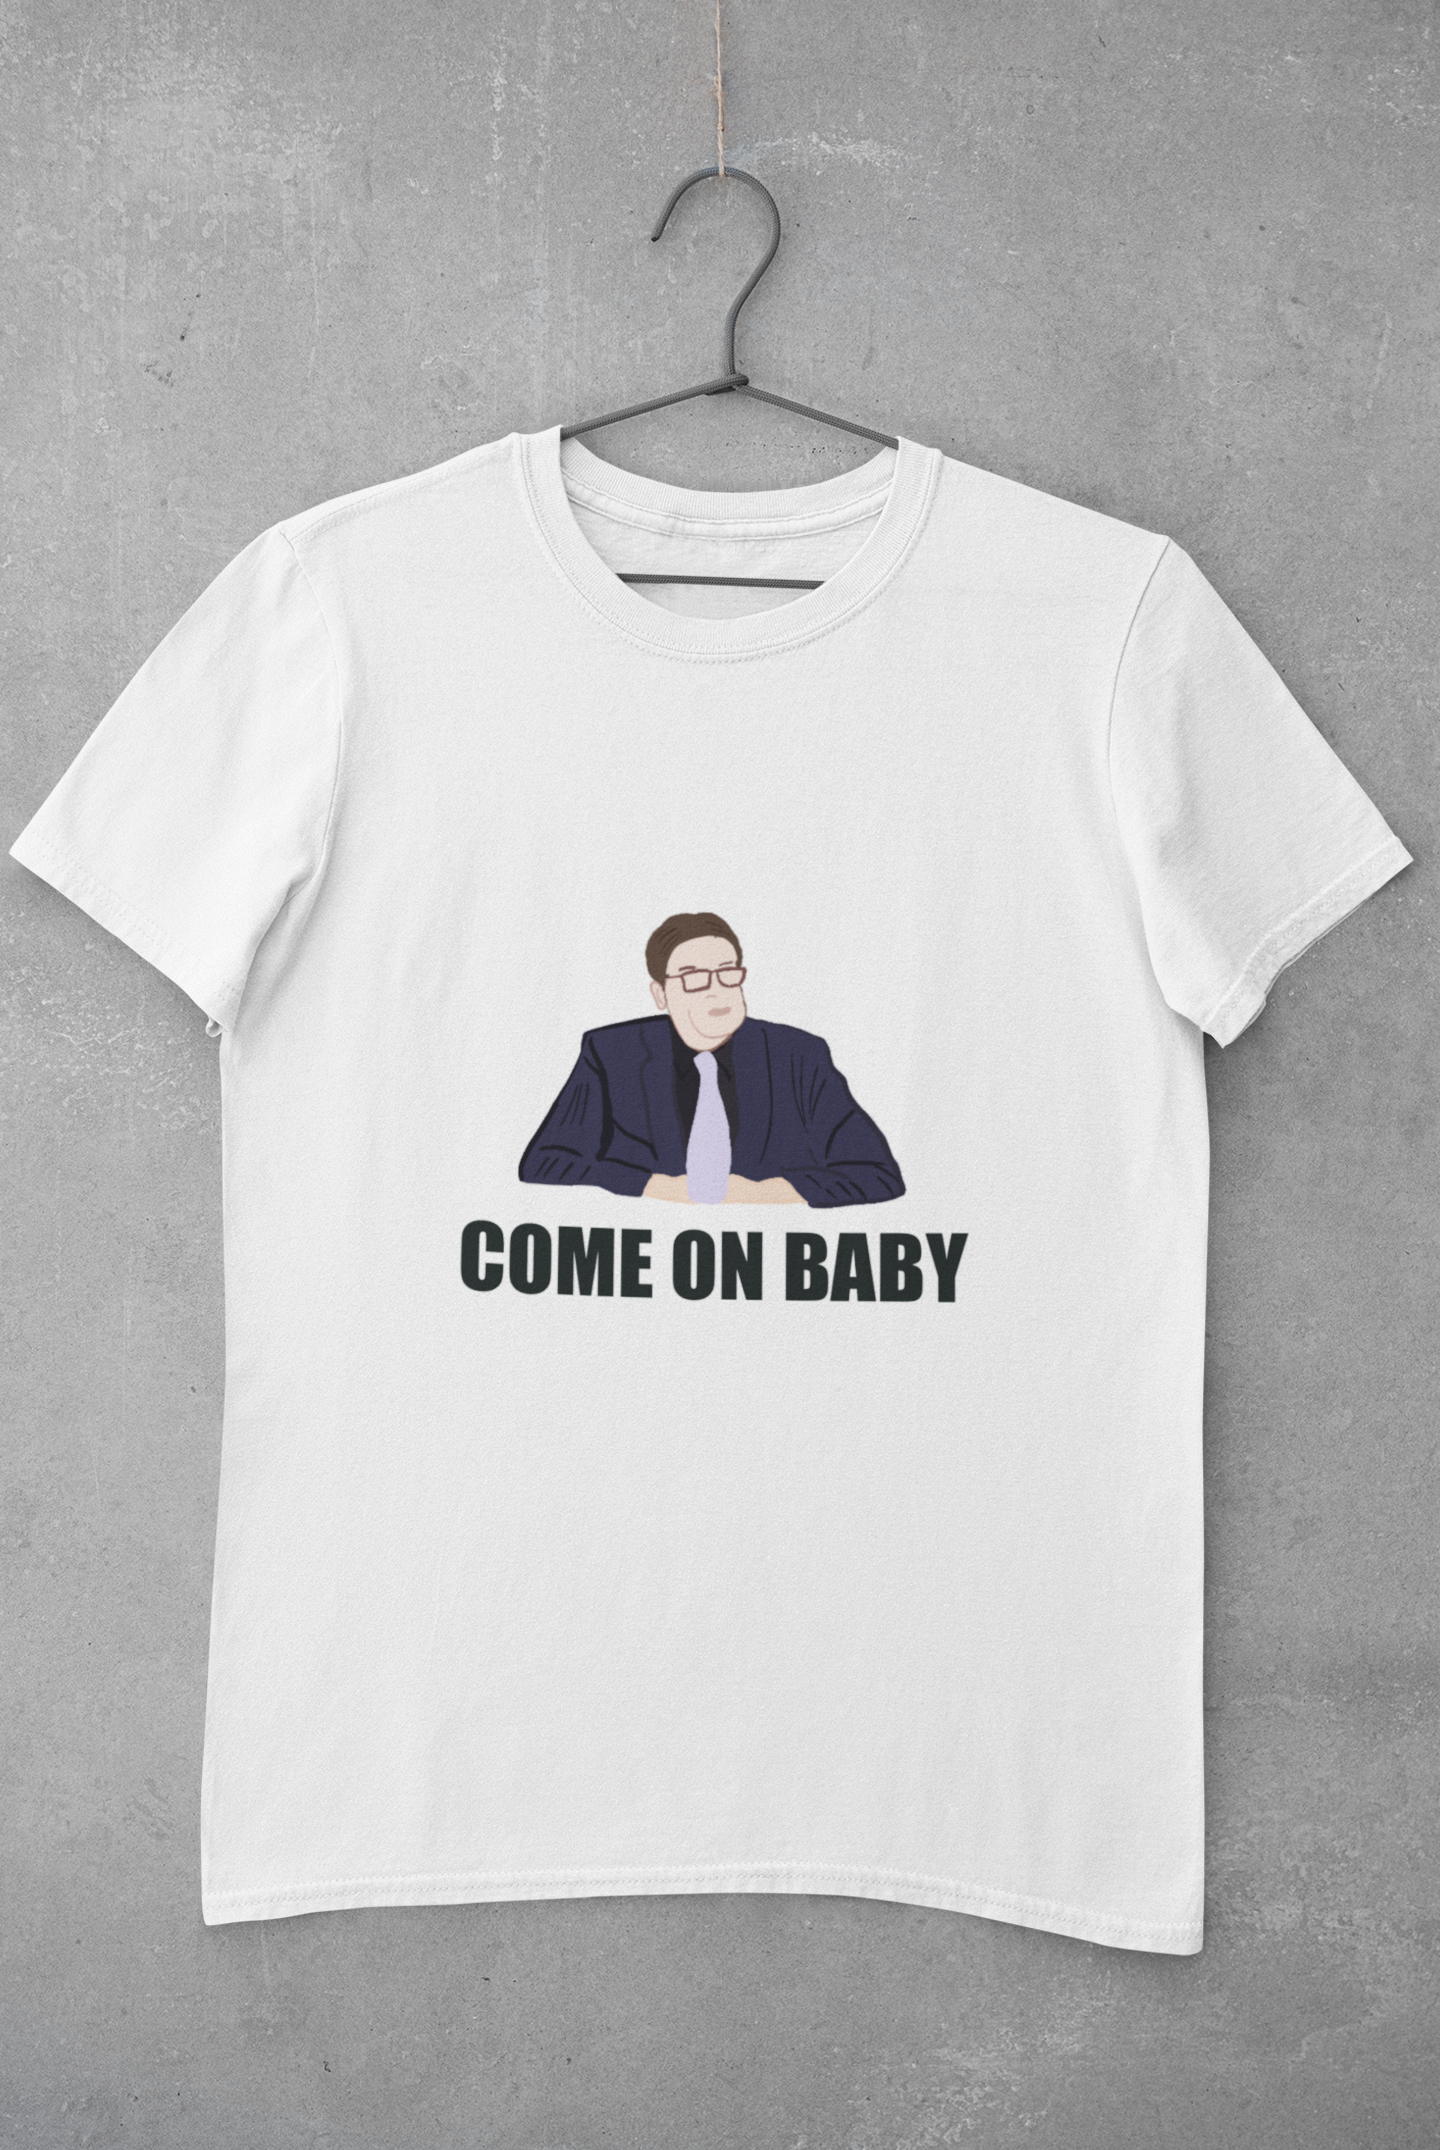 Come on baby T-shirt